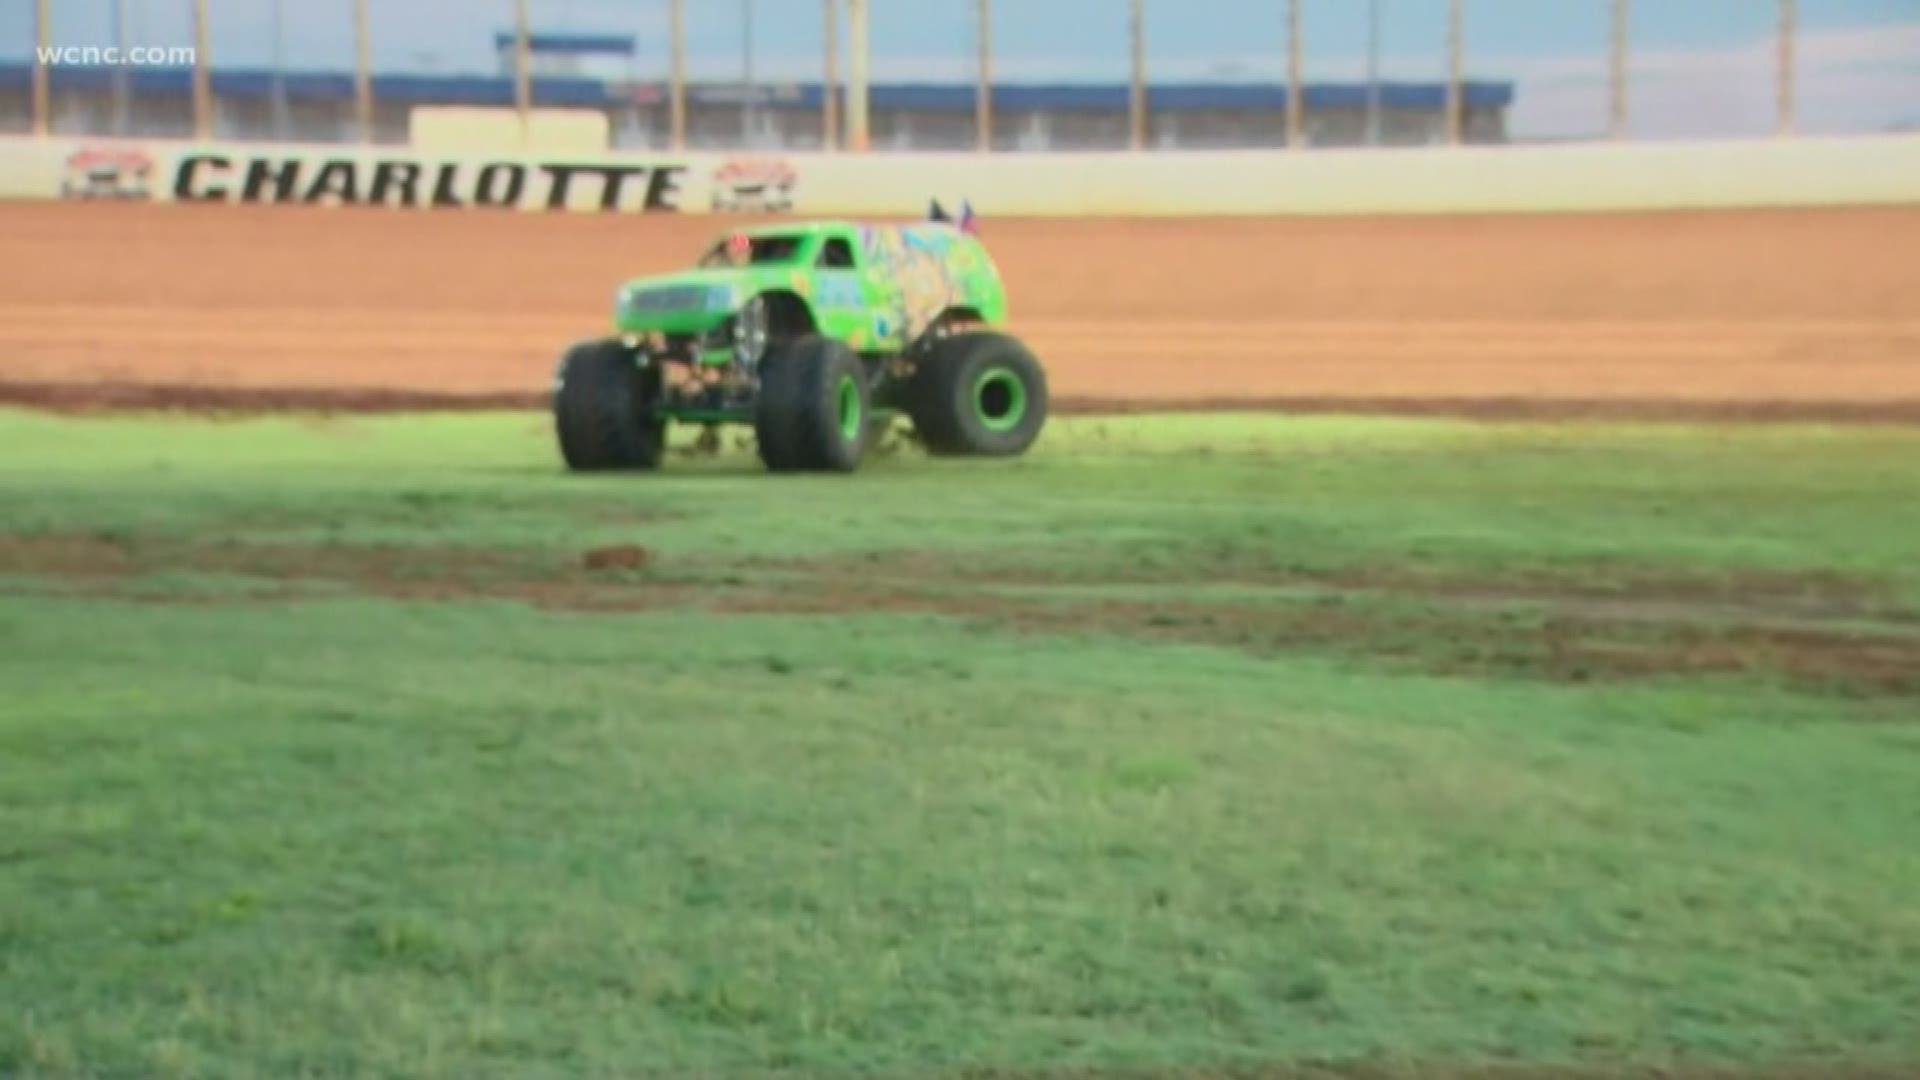 Drivers, start your engines! Kids will have one last hurrah before school starts with the back-to-school monster truck bash at Charlotte Motor Speedway.